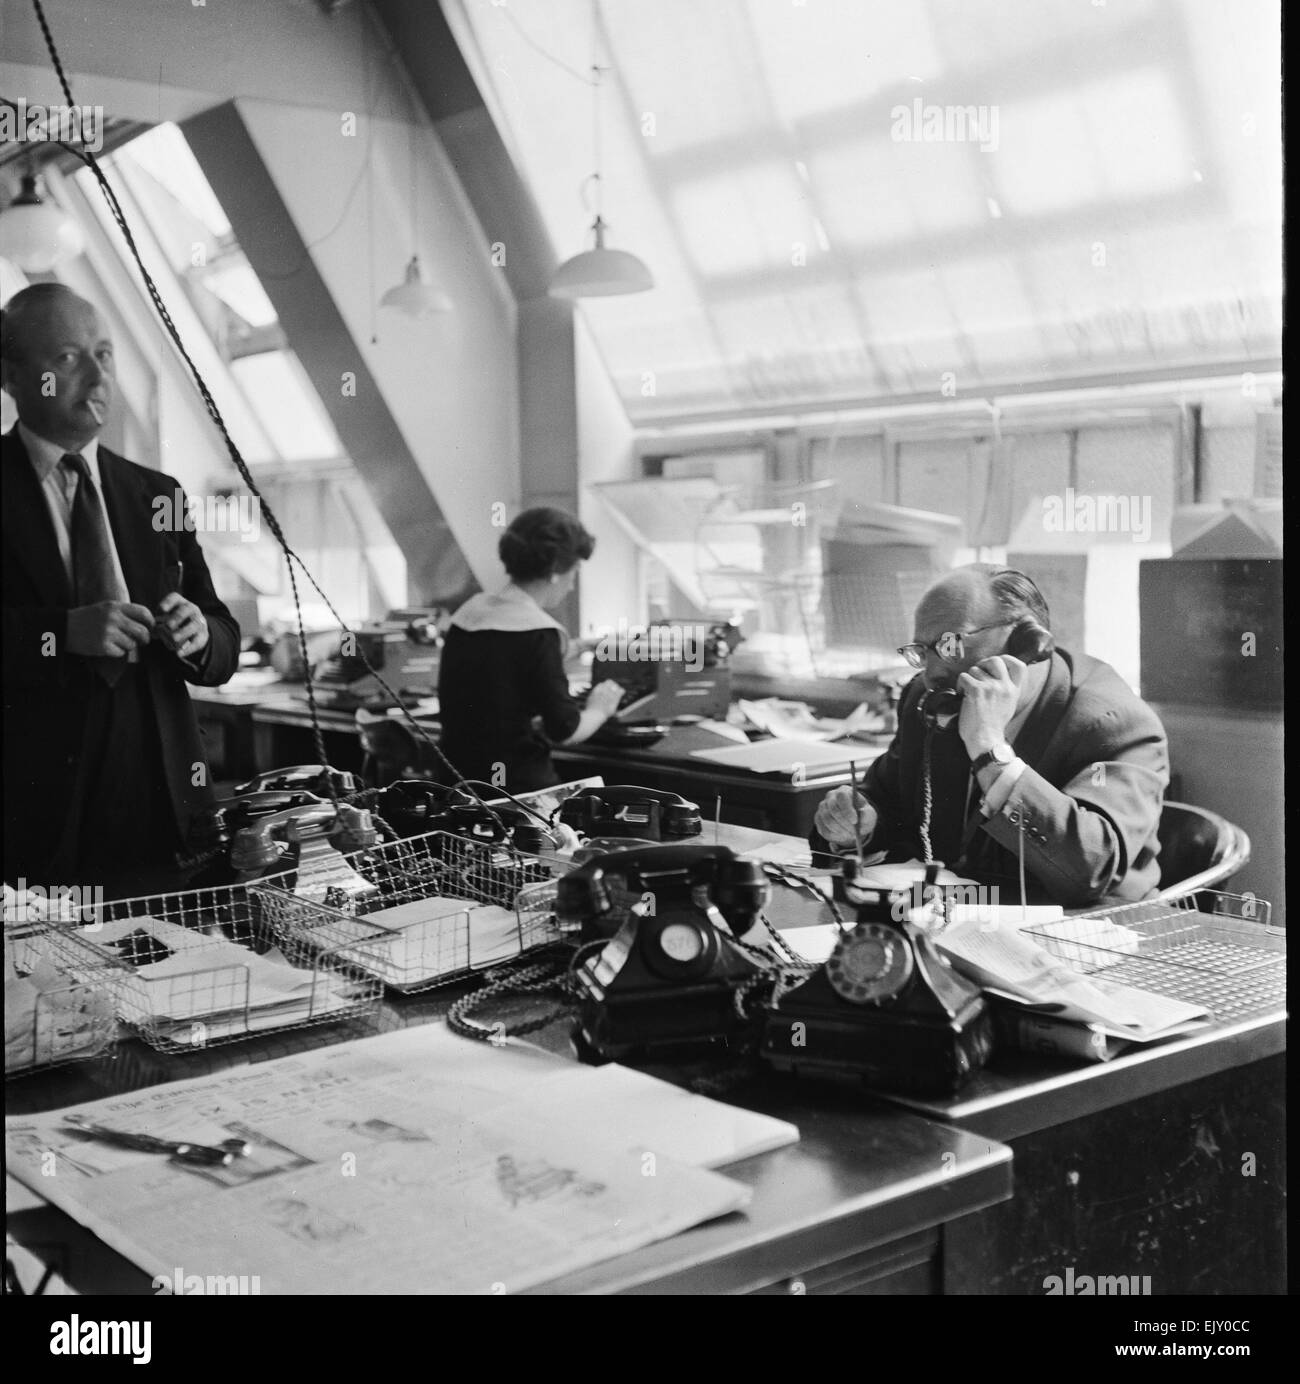 Daily Mirror Picture Desk 23rd March 1956 Stock Photo 80498332